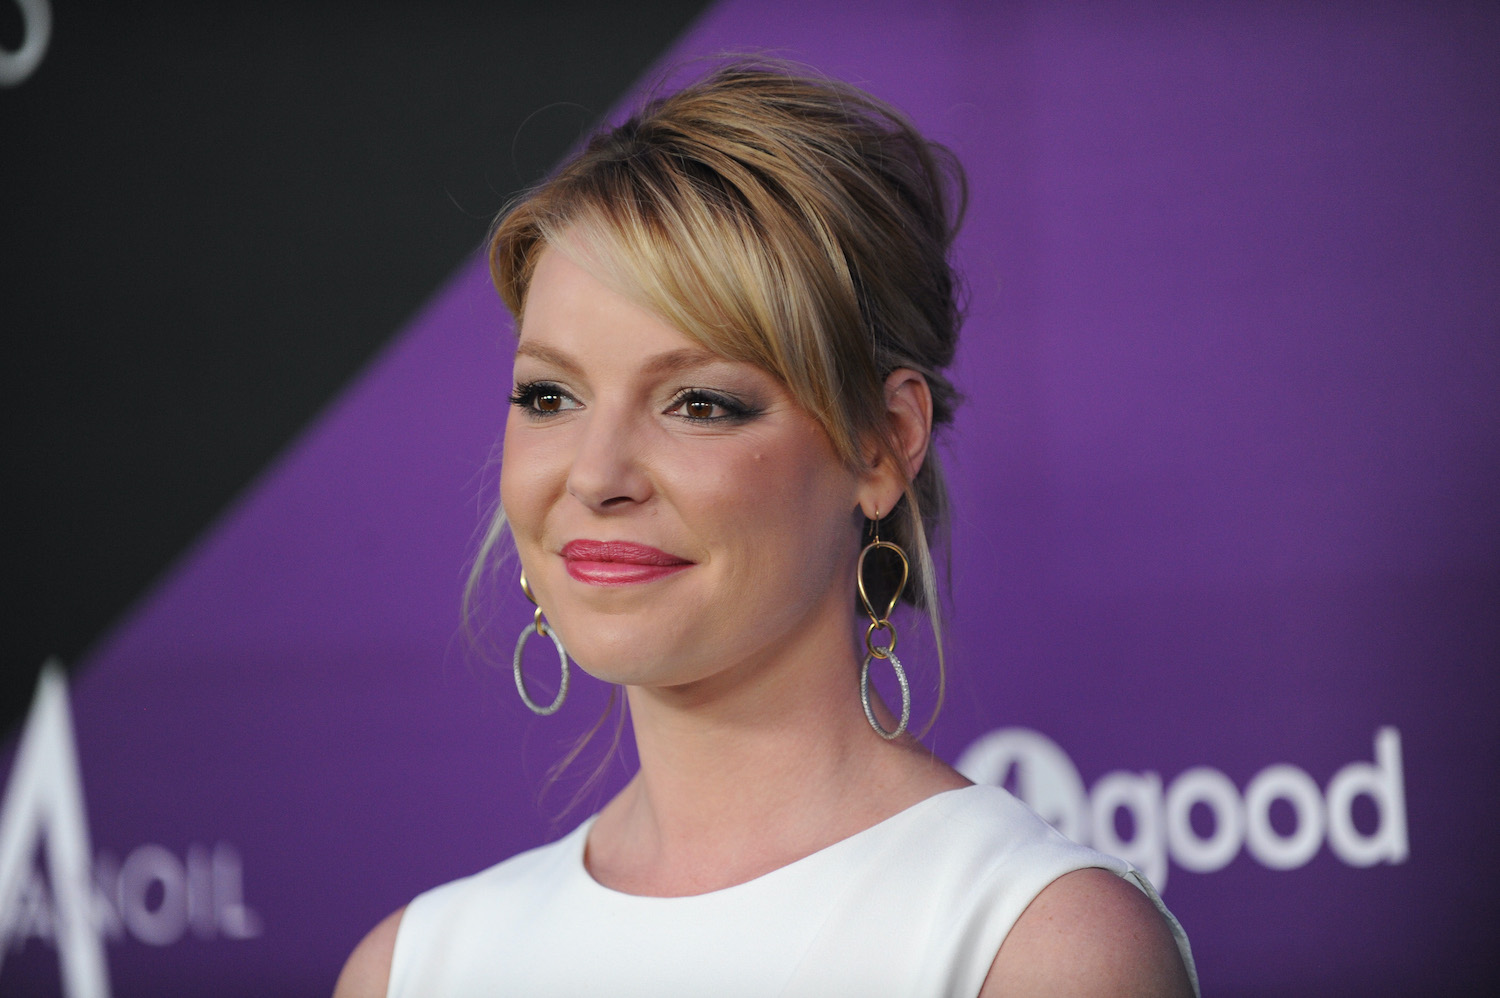 Katherine Heigl Says ‘It Was Hard’ to Love ‘Knocked Up,’ Calling Film ‘A Little Sexist’